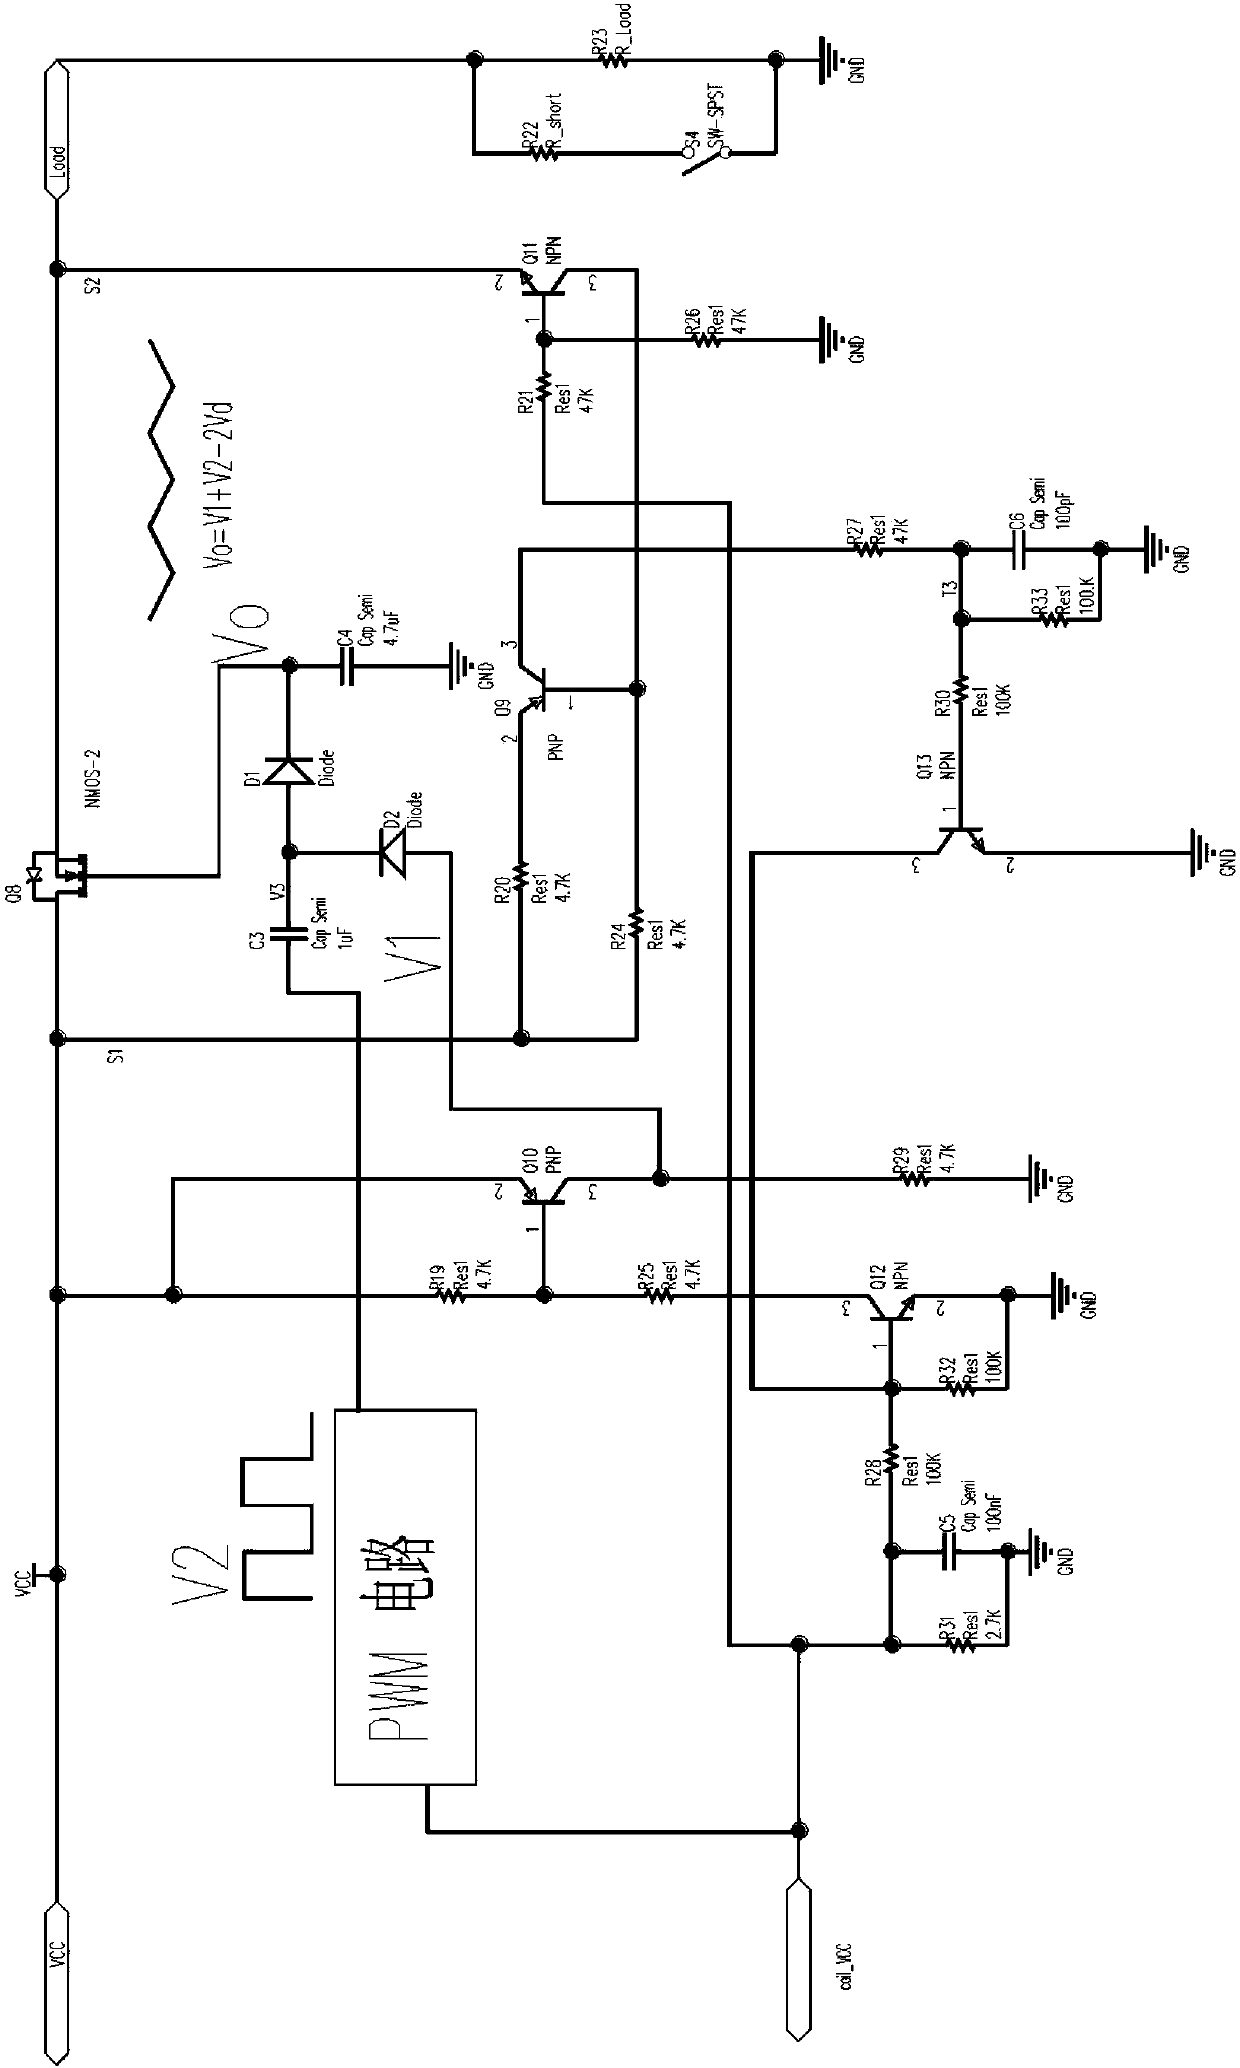 Automotive solid-state relay with NMOS tube and over-current protection